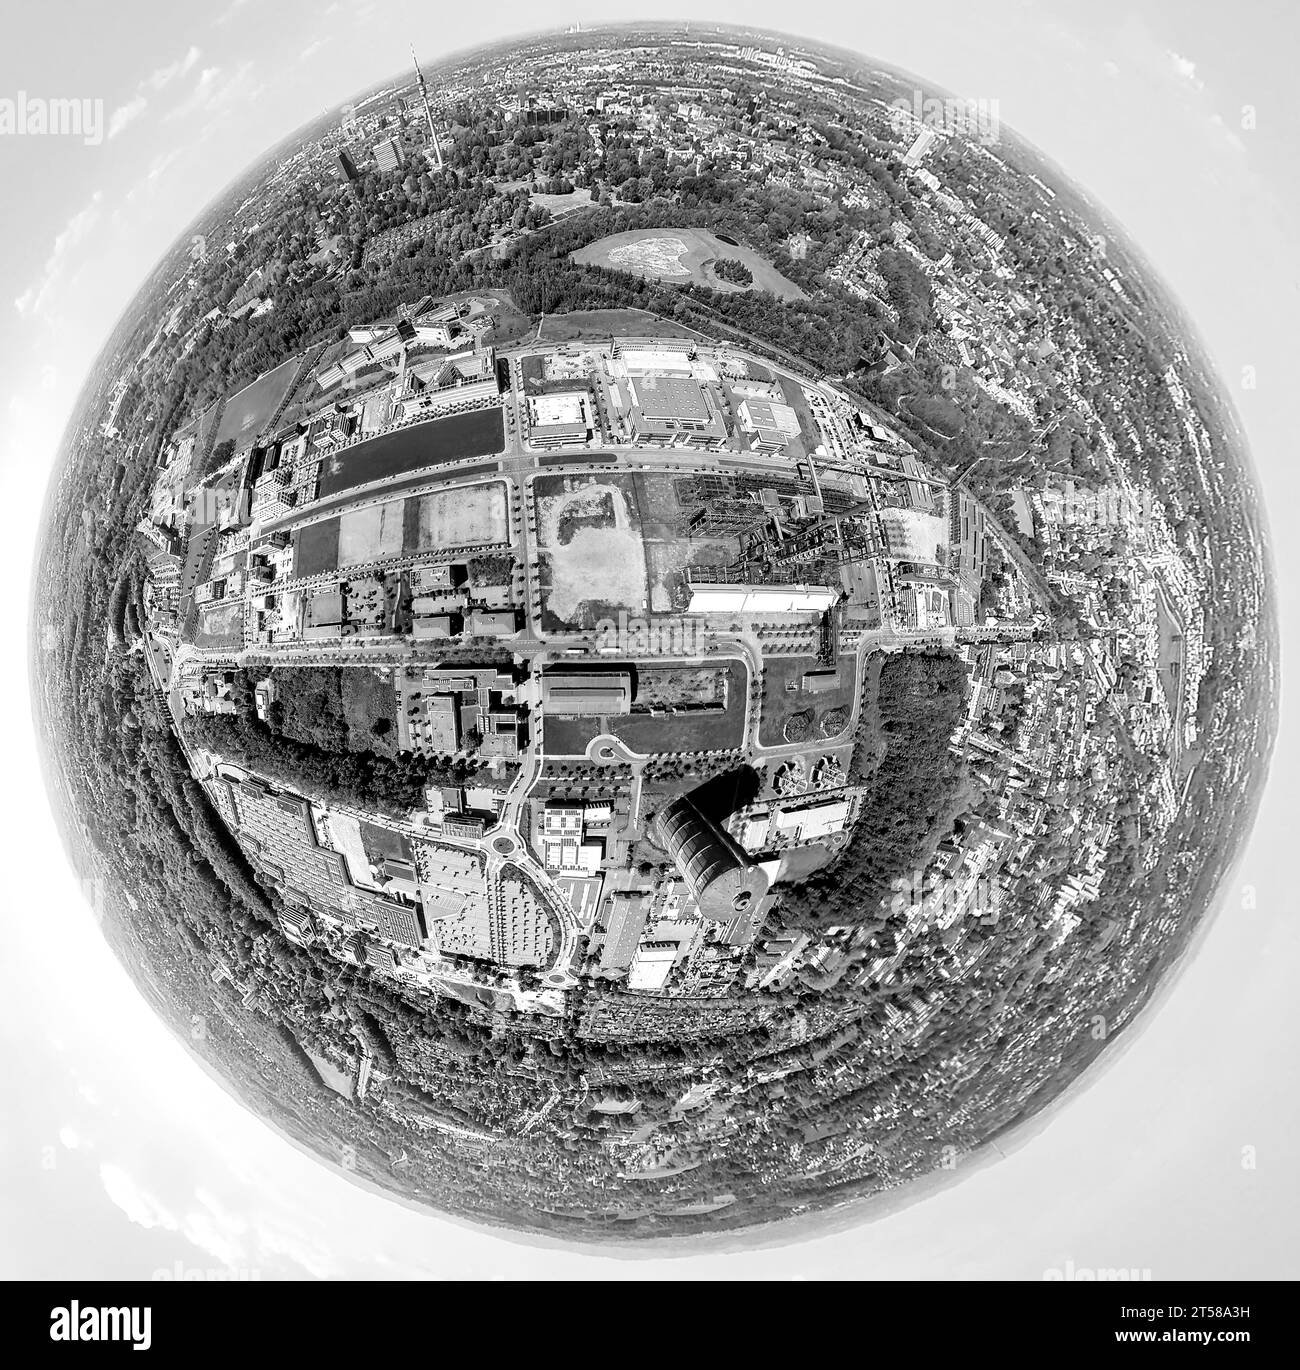 Aerial view, industrial area Phoenix West, technology park, black and white image, earth globe, fisheye image, 360 degree image, Hörde, Dortmund, Ruhr Stock Photo